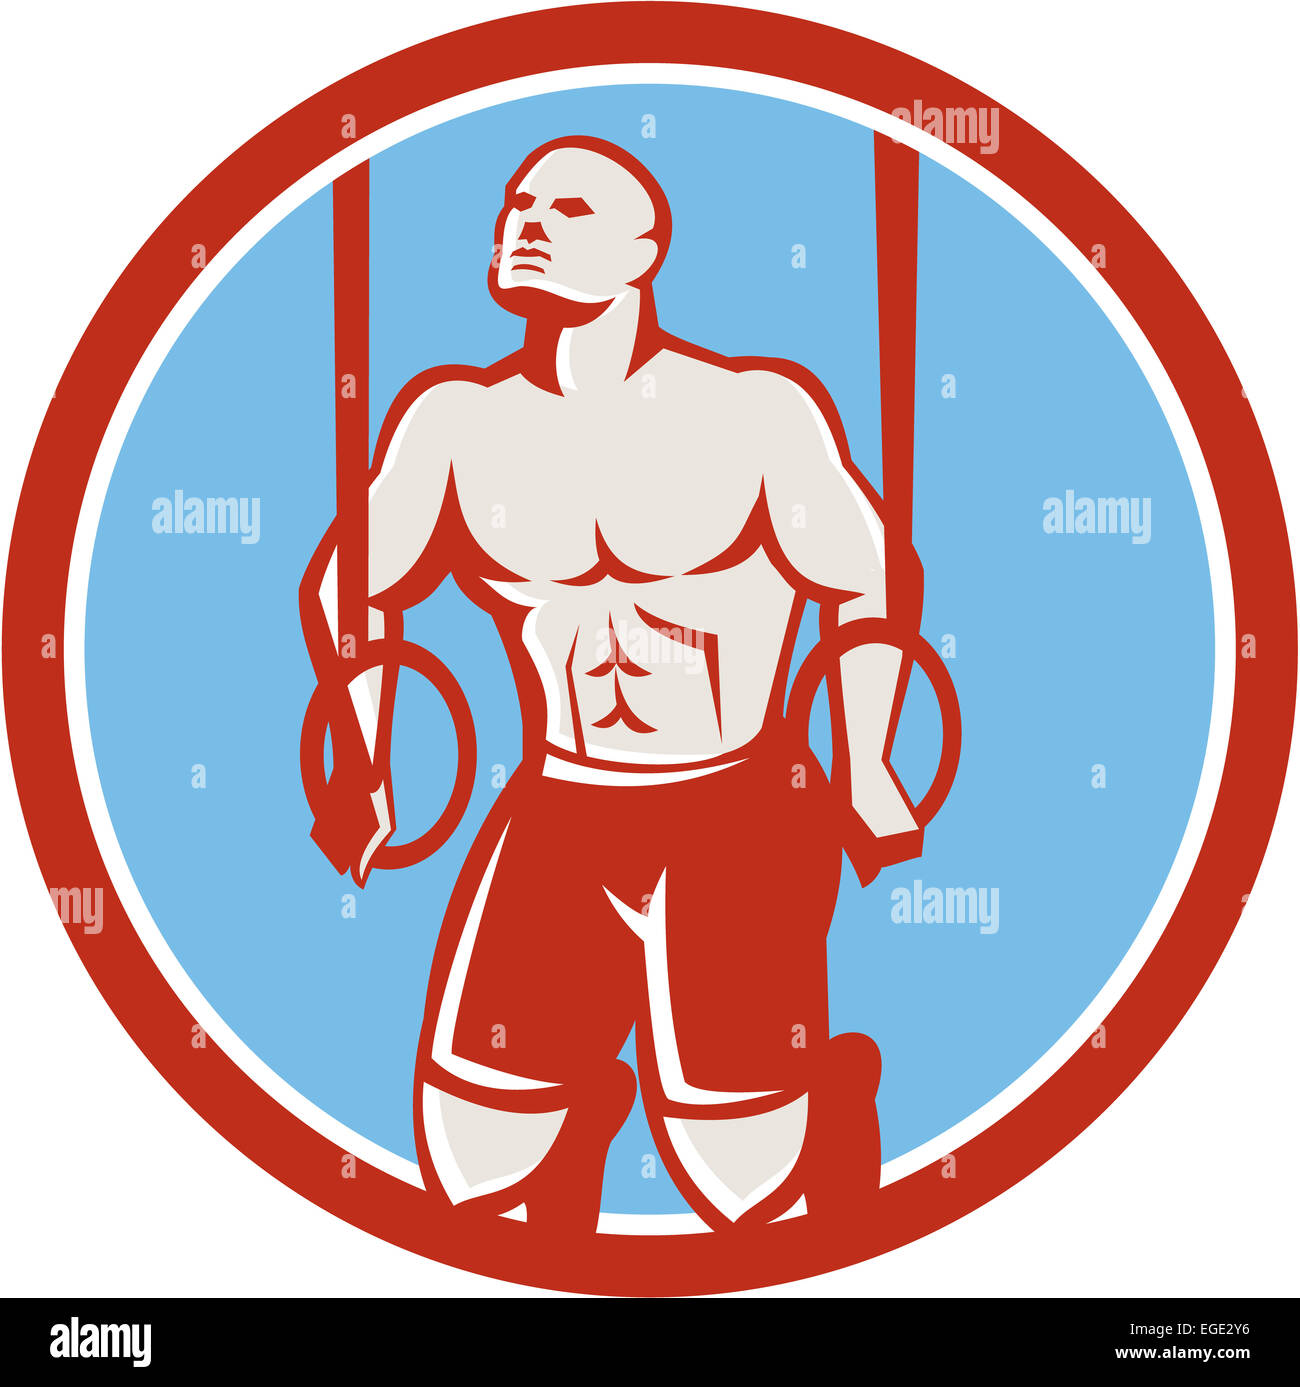 Illustration of a crossfit athlete body weight exercise hanging on gymnastic ring dip kipping muscle up facing front inside circle done in retro style on isolated white background Stock Photo